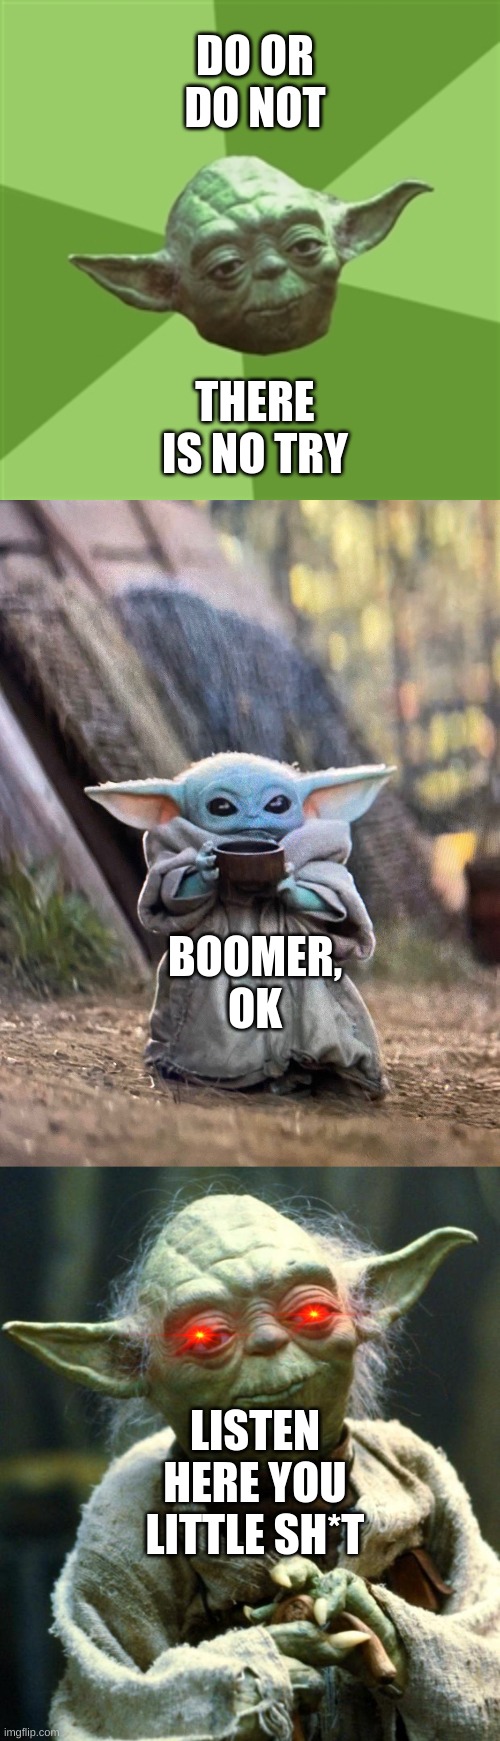 tee hee | DO OR DO NOT; THERE IS NO TRY; BOOMER, OK; LISTEN HERE YOU LITTLE SH*T | image tagged in memes,advice yoda,star wars yoda,baby yoda tea | made w/ Imgflip meme maker